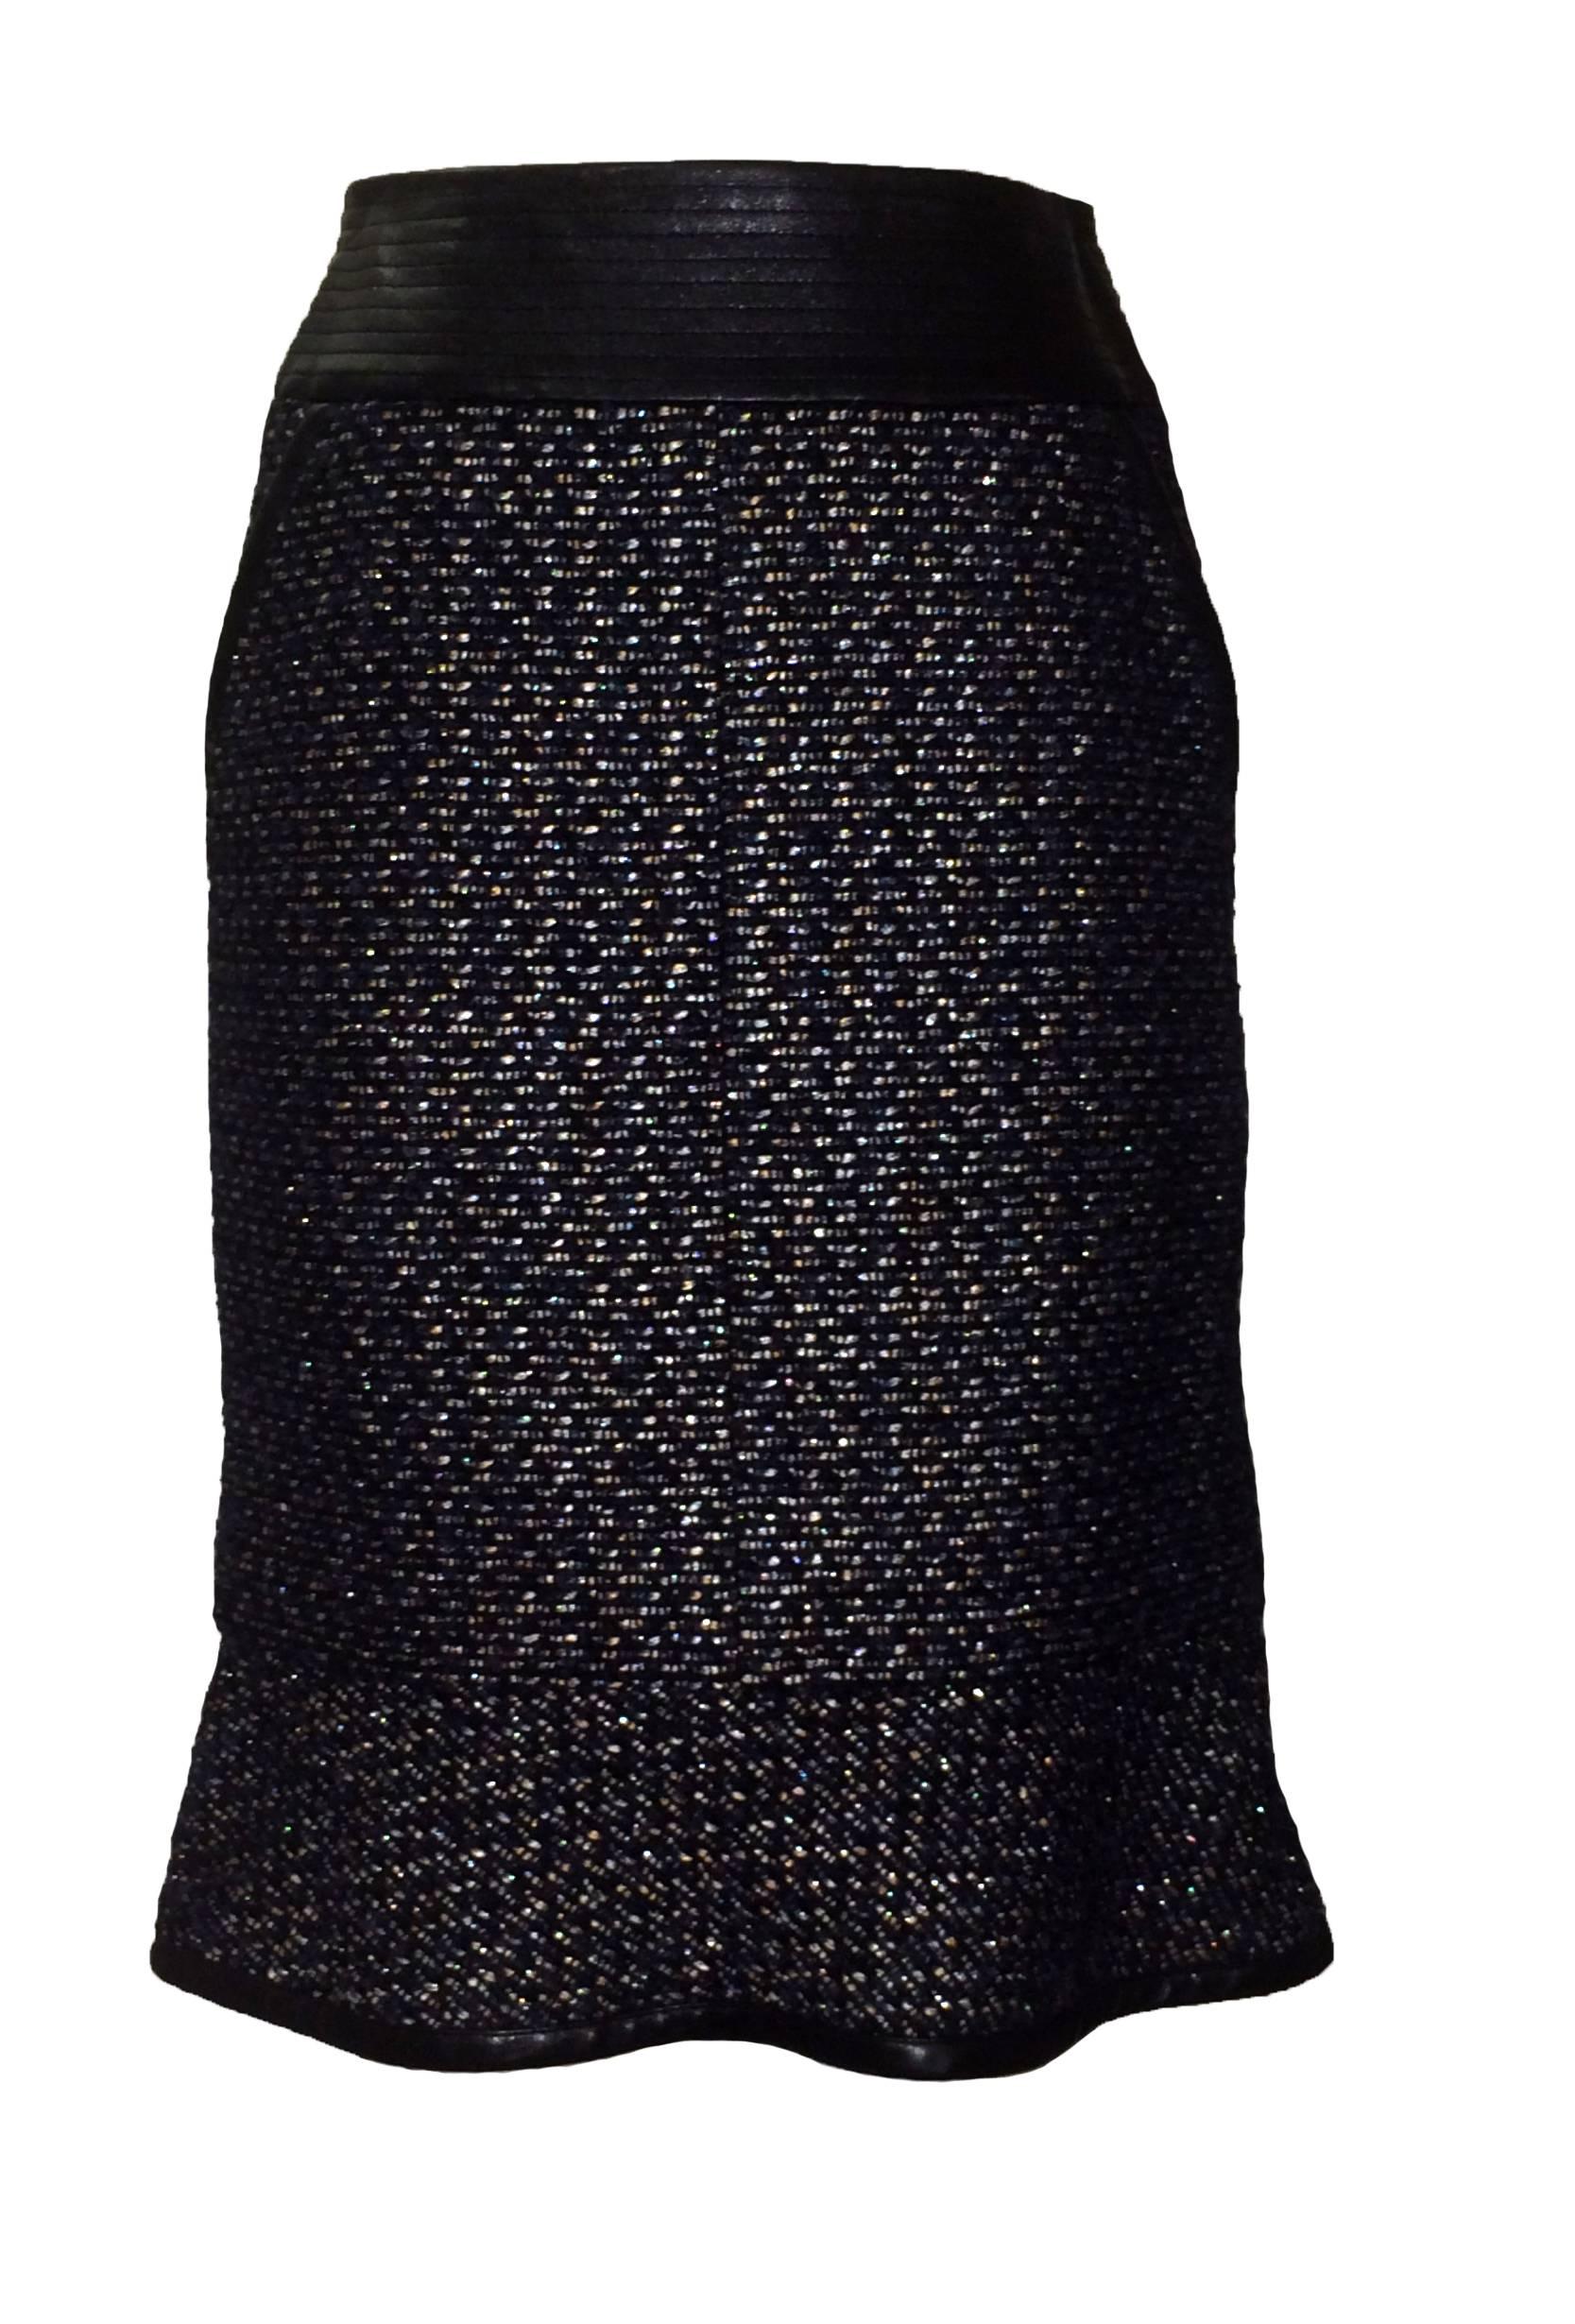 Chanel 02A with Tags Navy Metallic Boucle Skirt & Jacket Suit with Leather Trim 2